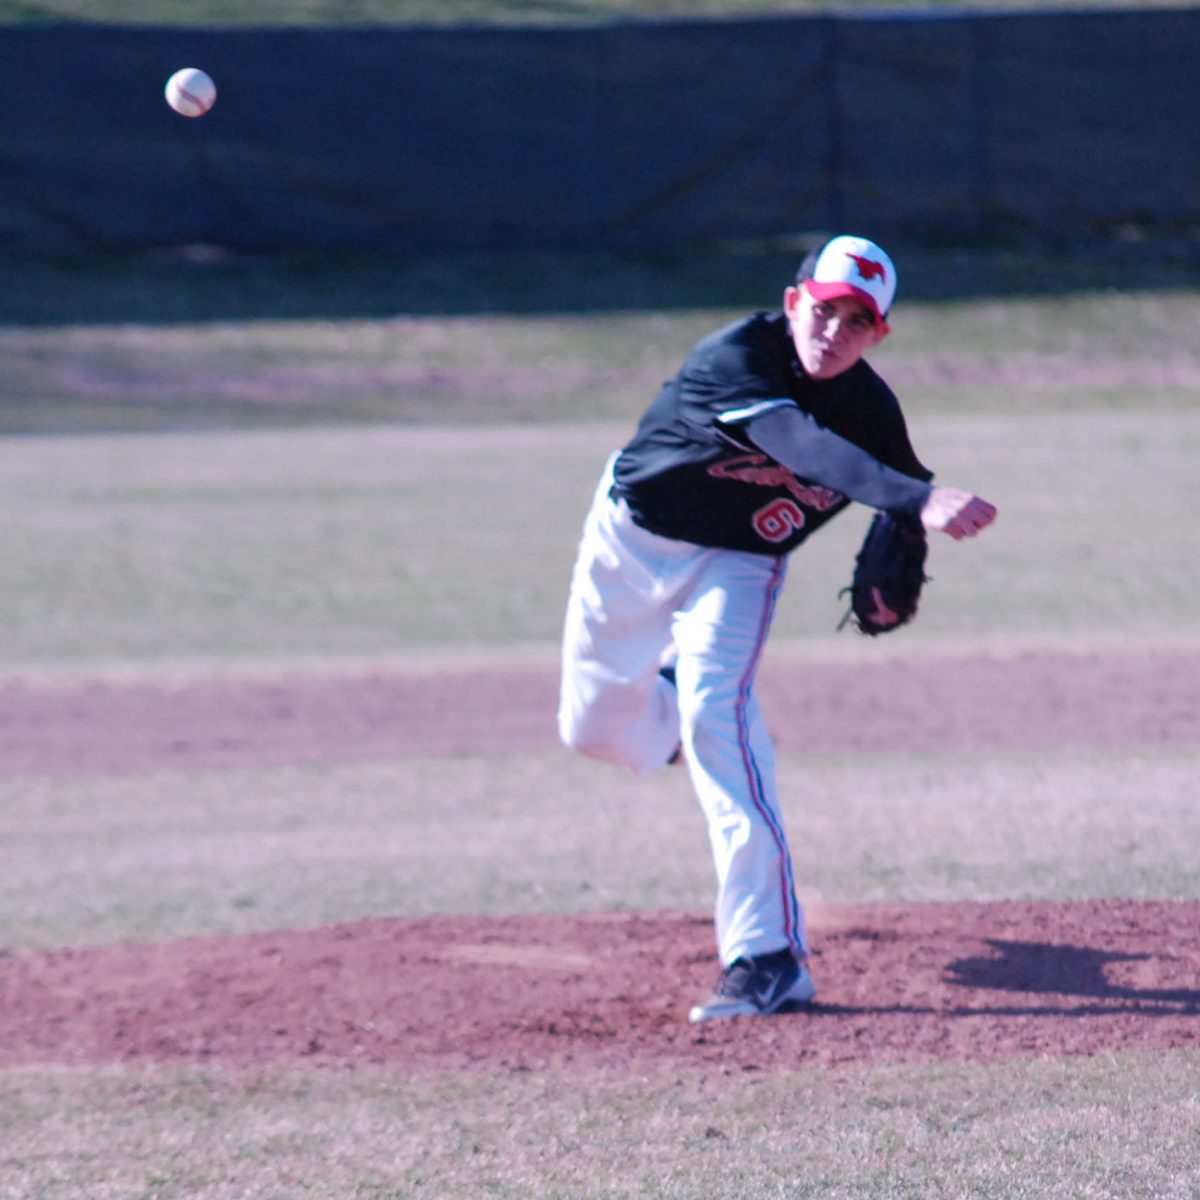 Senior Brian Hillhouse pitched six scorless innings to lead the Colts over St. Charles 5-0. Photo by Emily Schenberg.